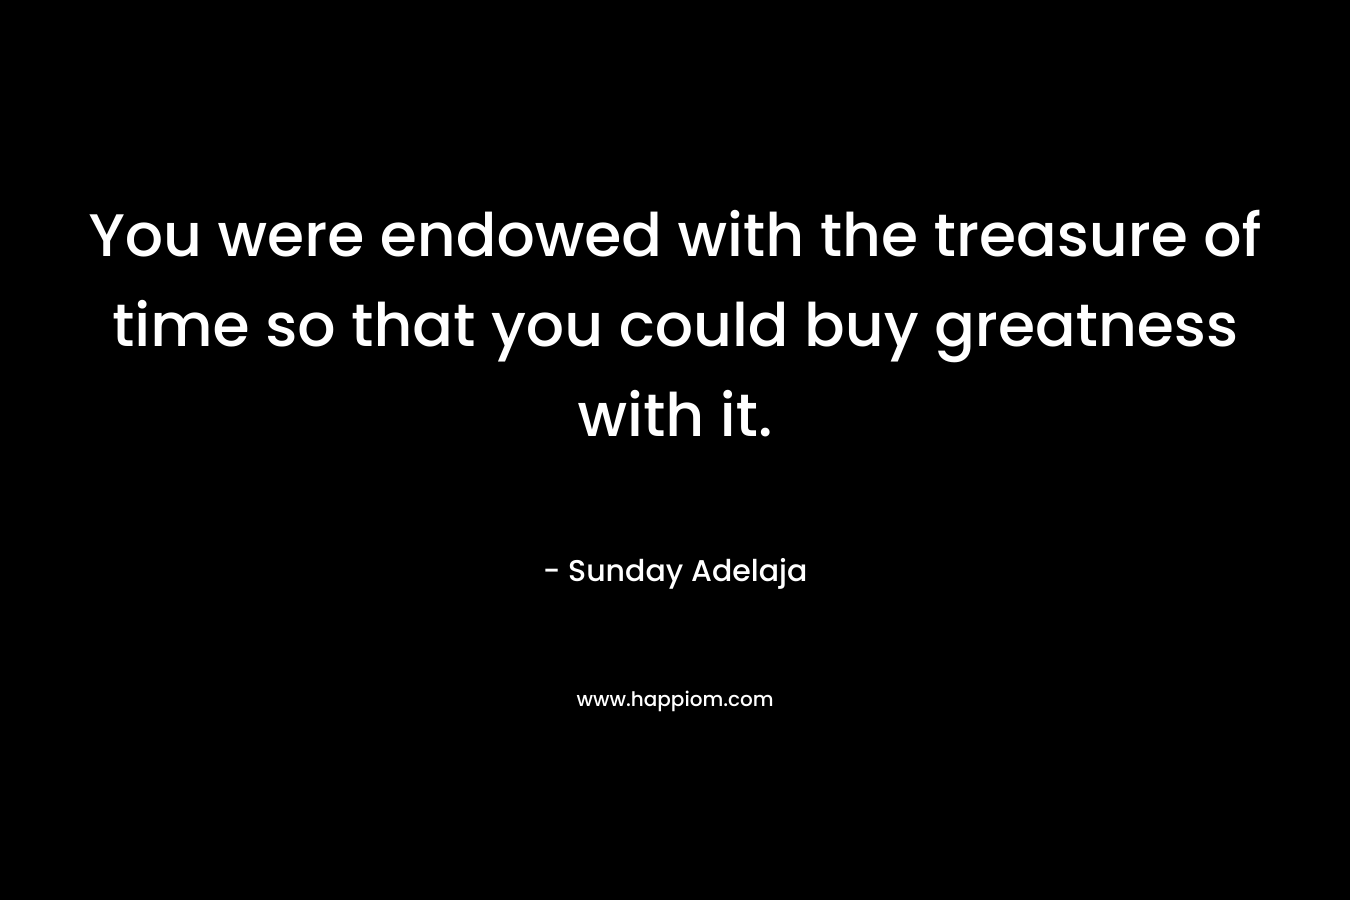 You were endowed with the treasure of time so that you could buy greatness with it.